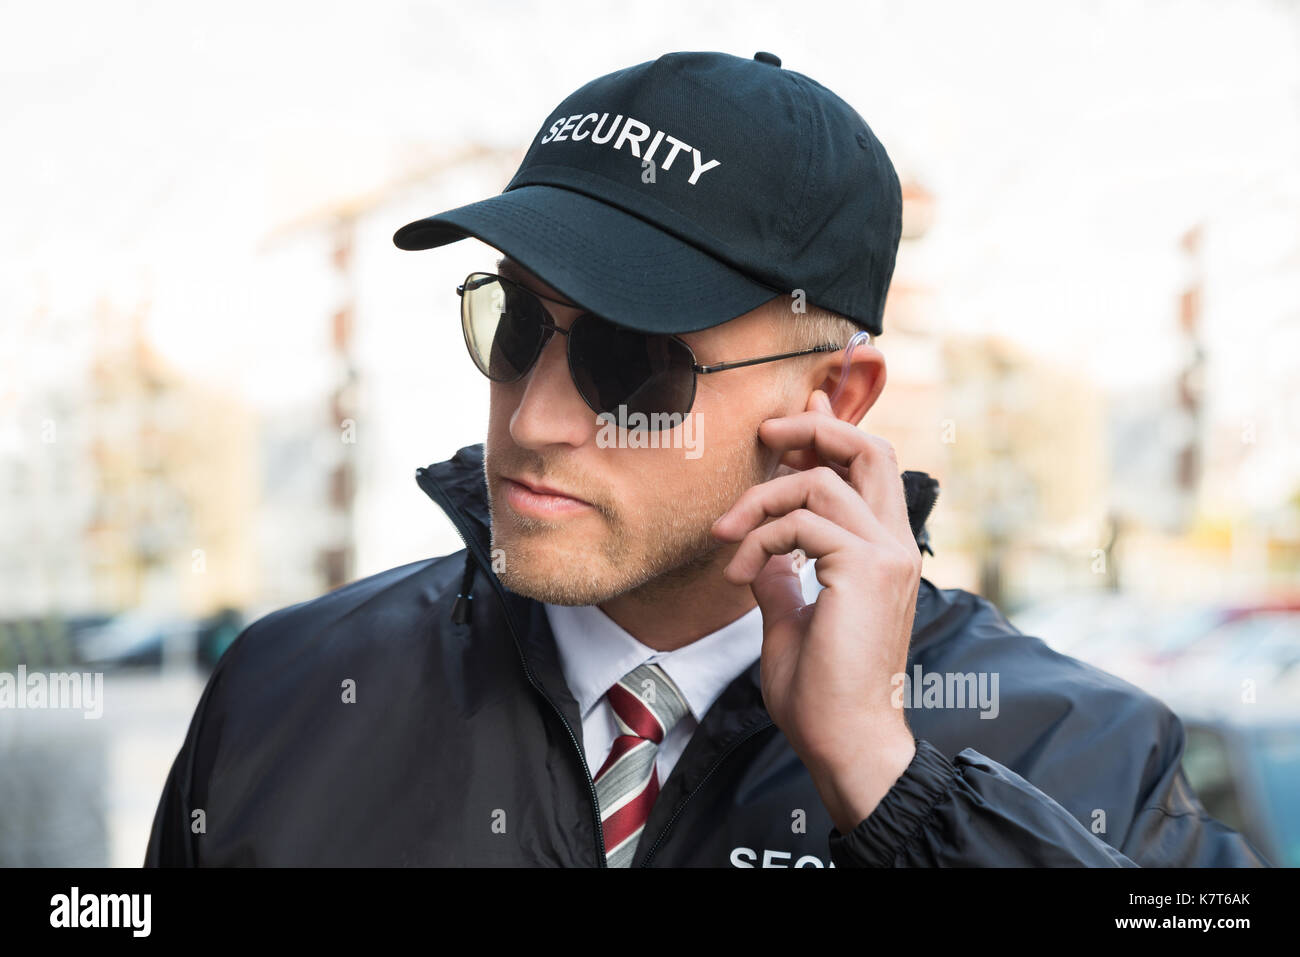 Portrait Of Young Male Security Guard Listening To Earpiece Stock Photo